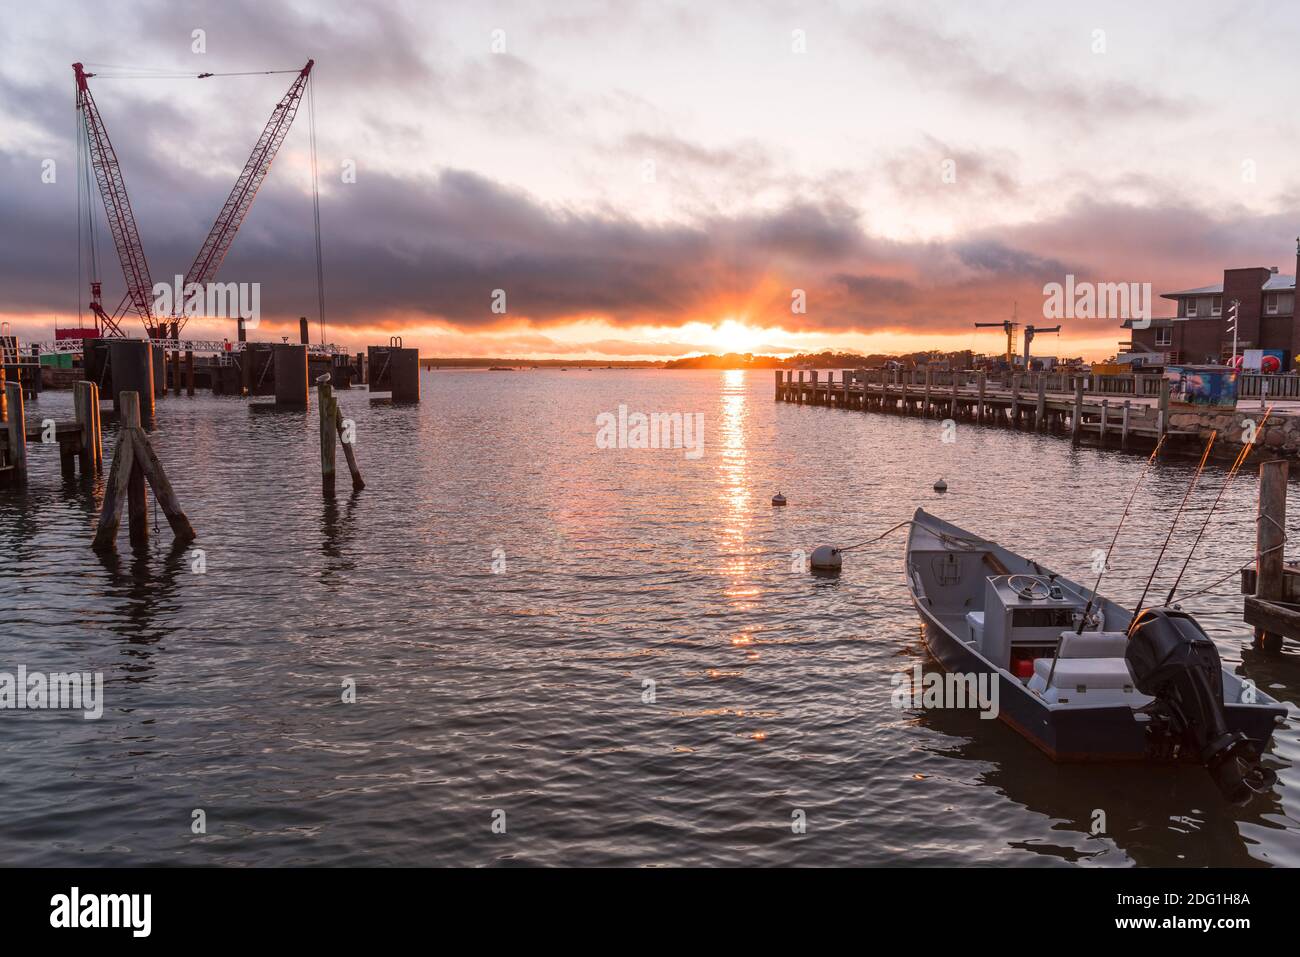 Majestic sunset over a harbour in autumn Stock Photo